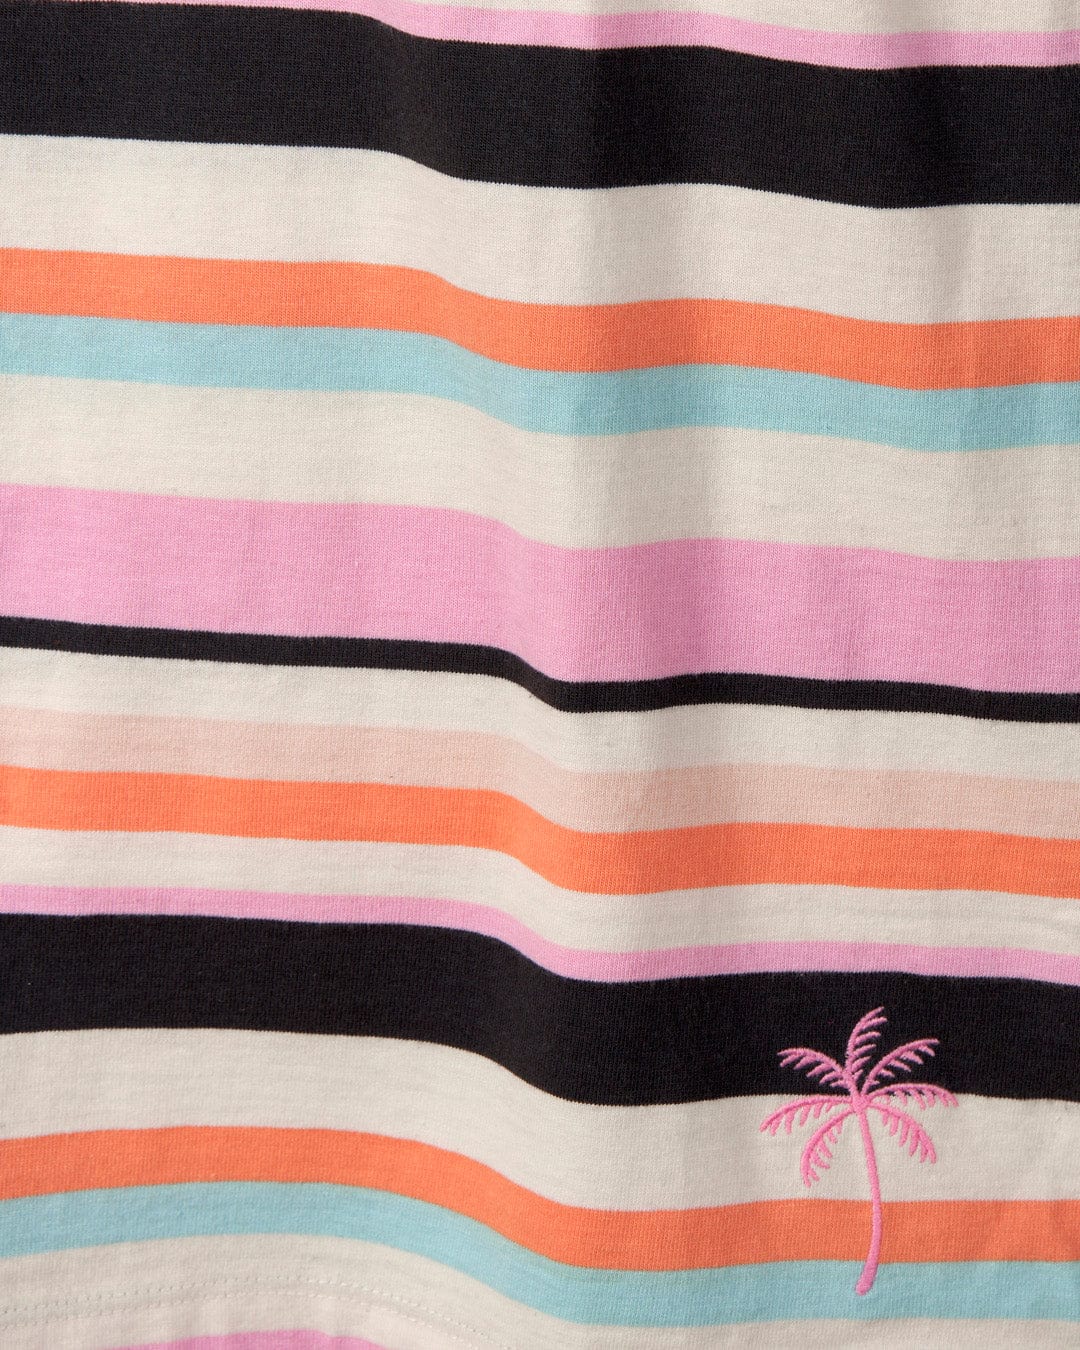 Close-up of a Juno Womens Midi Dress - Multi from Saltrock, with horizontal stripes in black, white, pink, orange, and blue, and a small embroidered palm tree design on the lower left side.